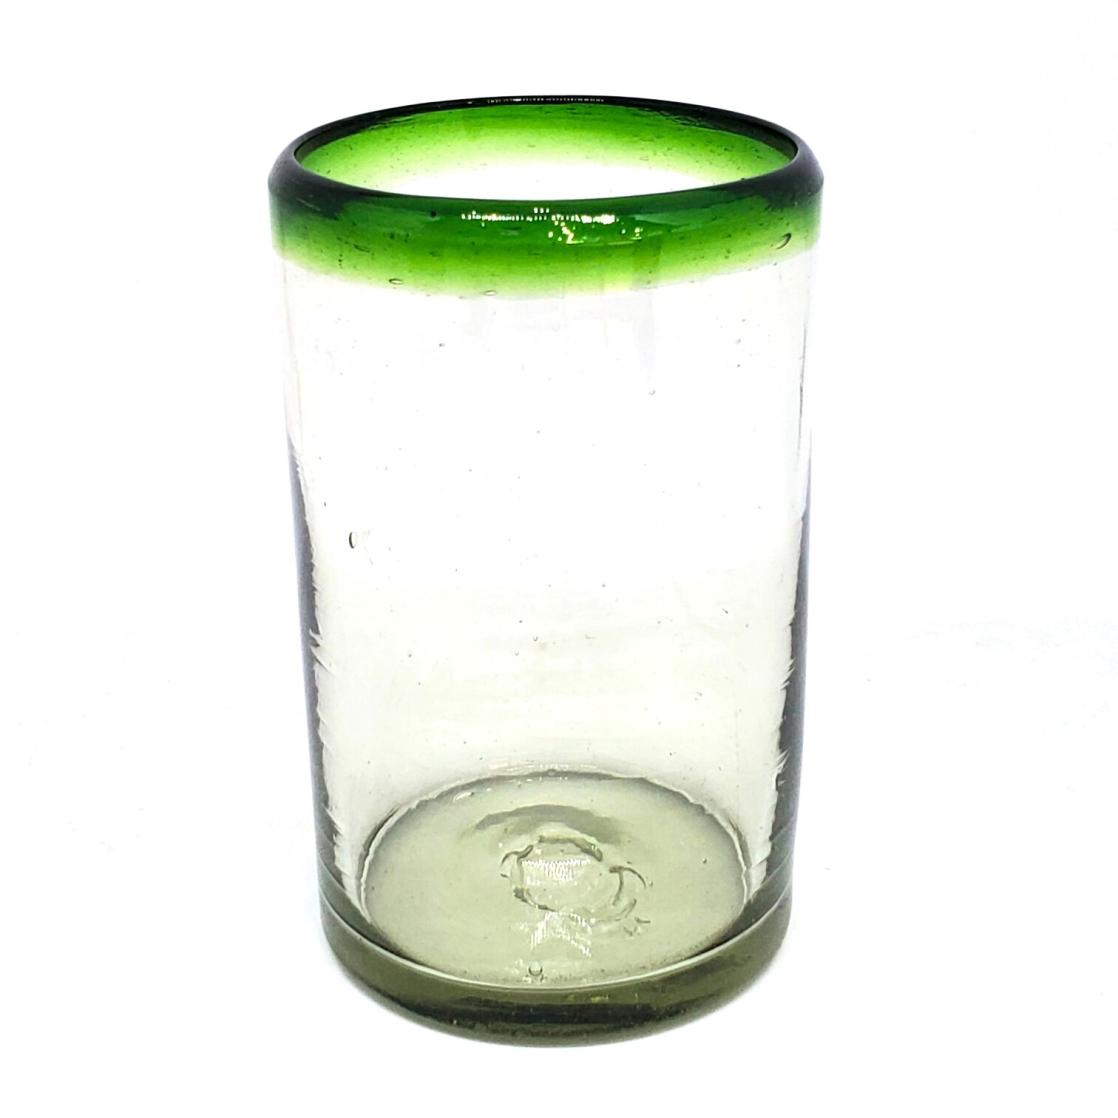 Sale Items / Emerald Green Rim 14 oz Drinking Glasses (set of 6) / These handcrafted glasses deliver a classic touch to your favorite drink.